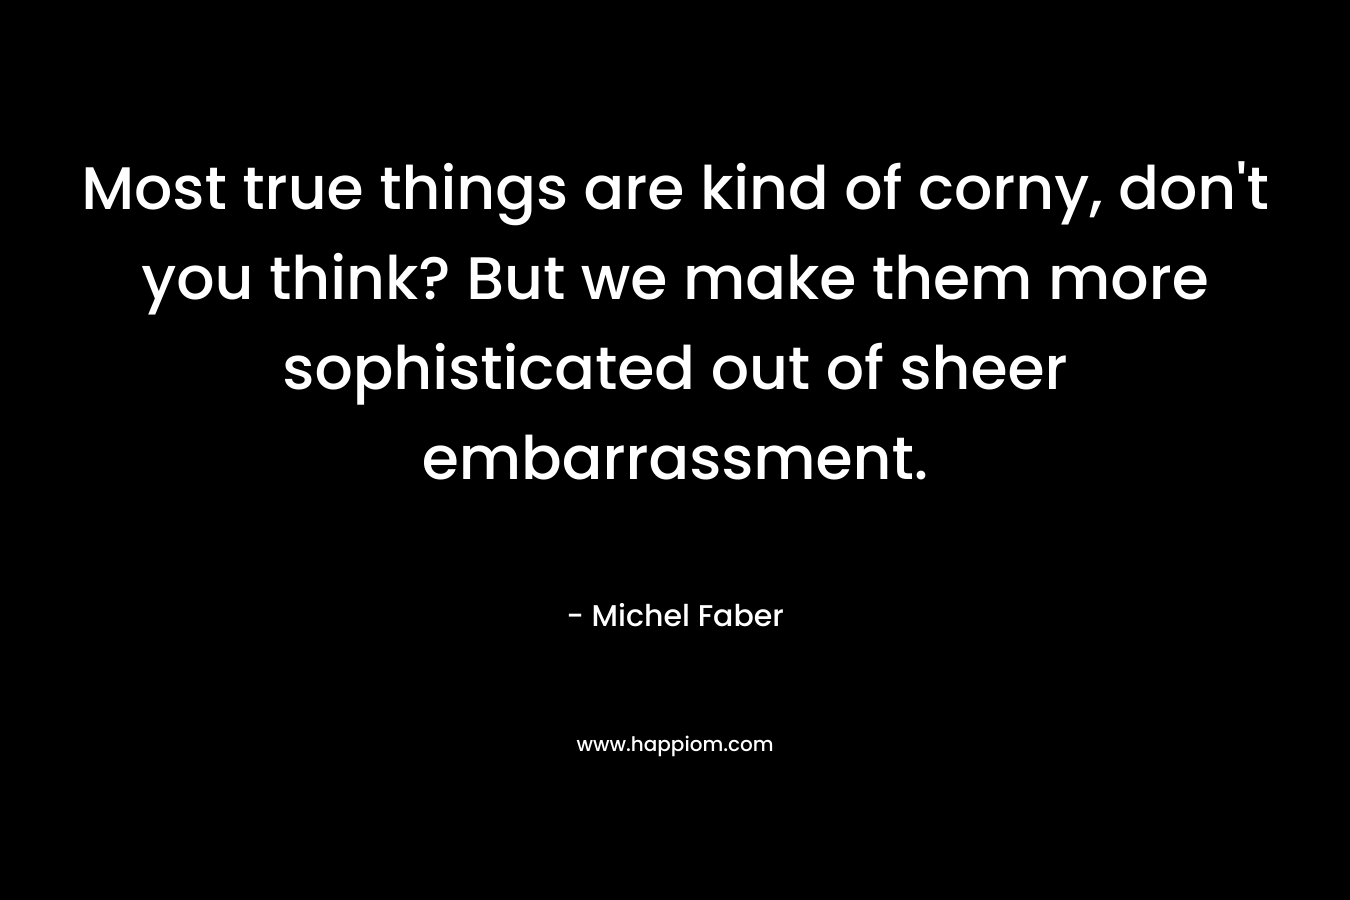 Most true things are kind of corny, don’t you think? But we make them more sophisticated out of sheer embarrassment. – Michel Faber